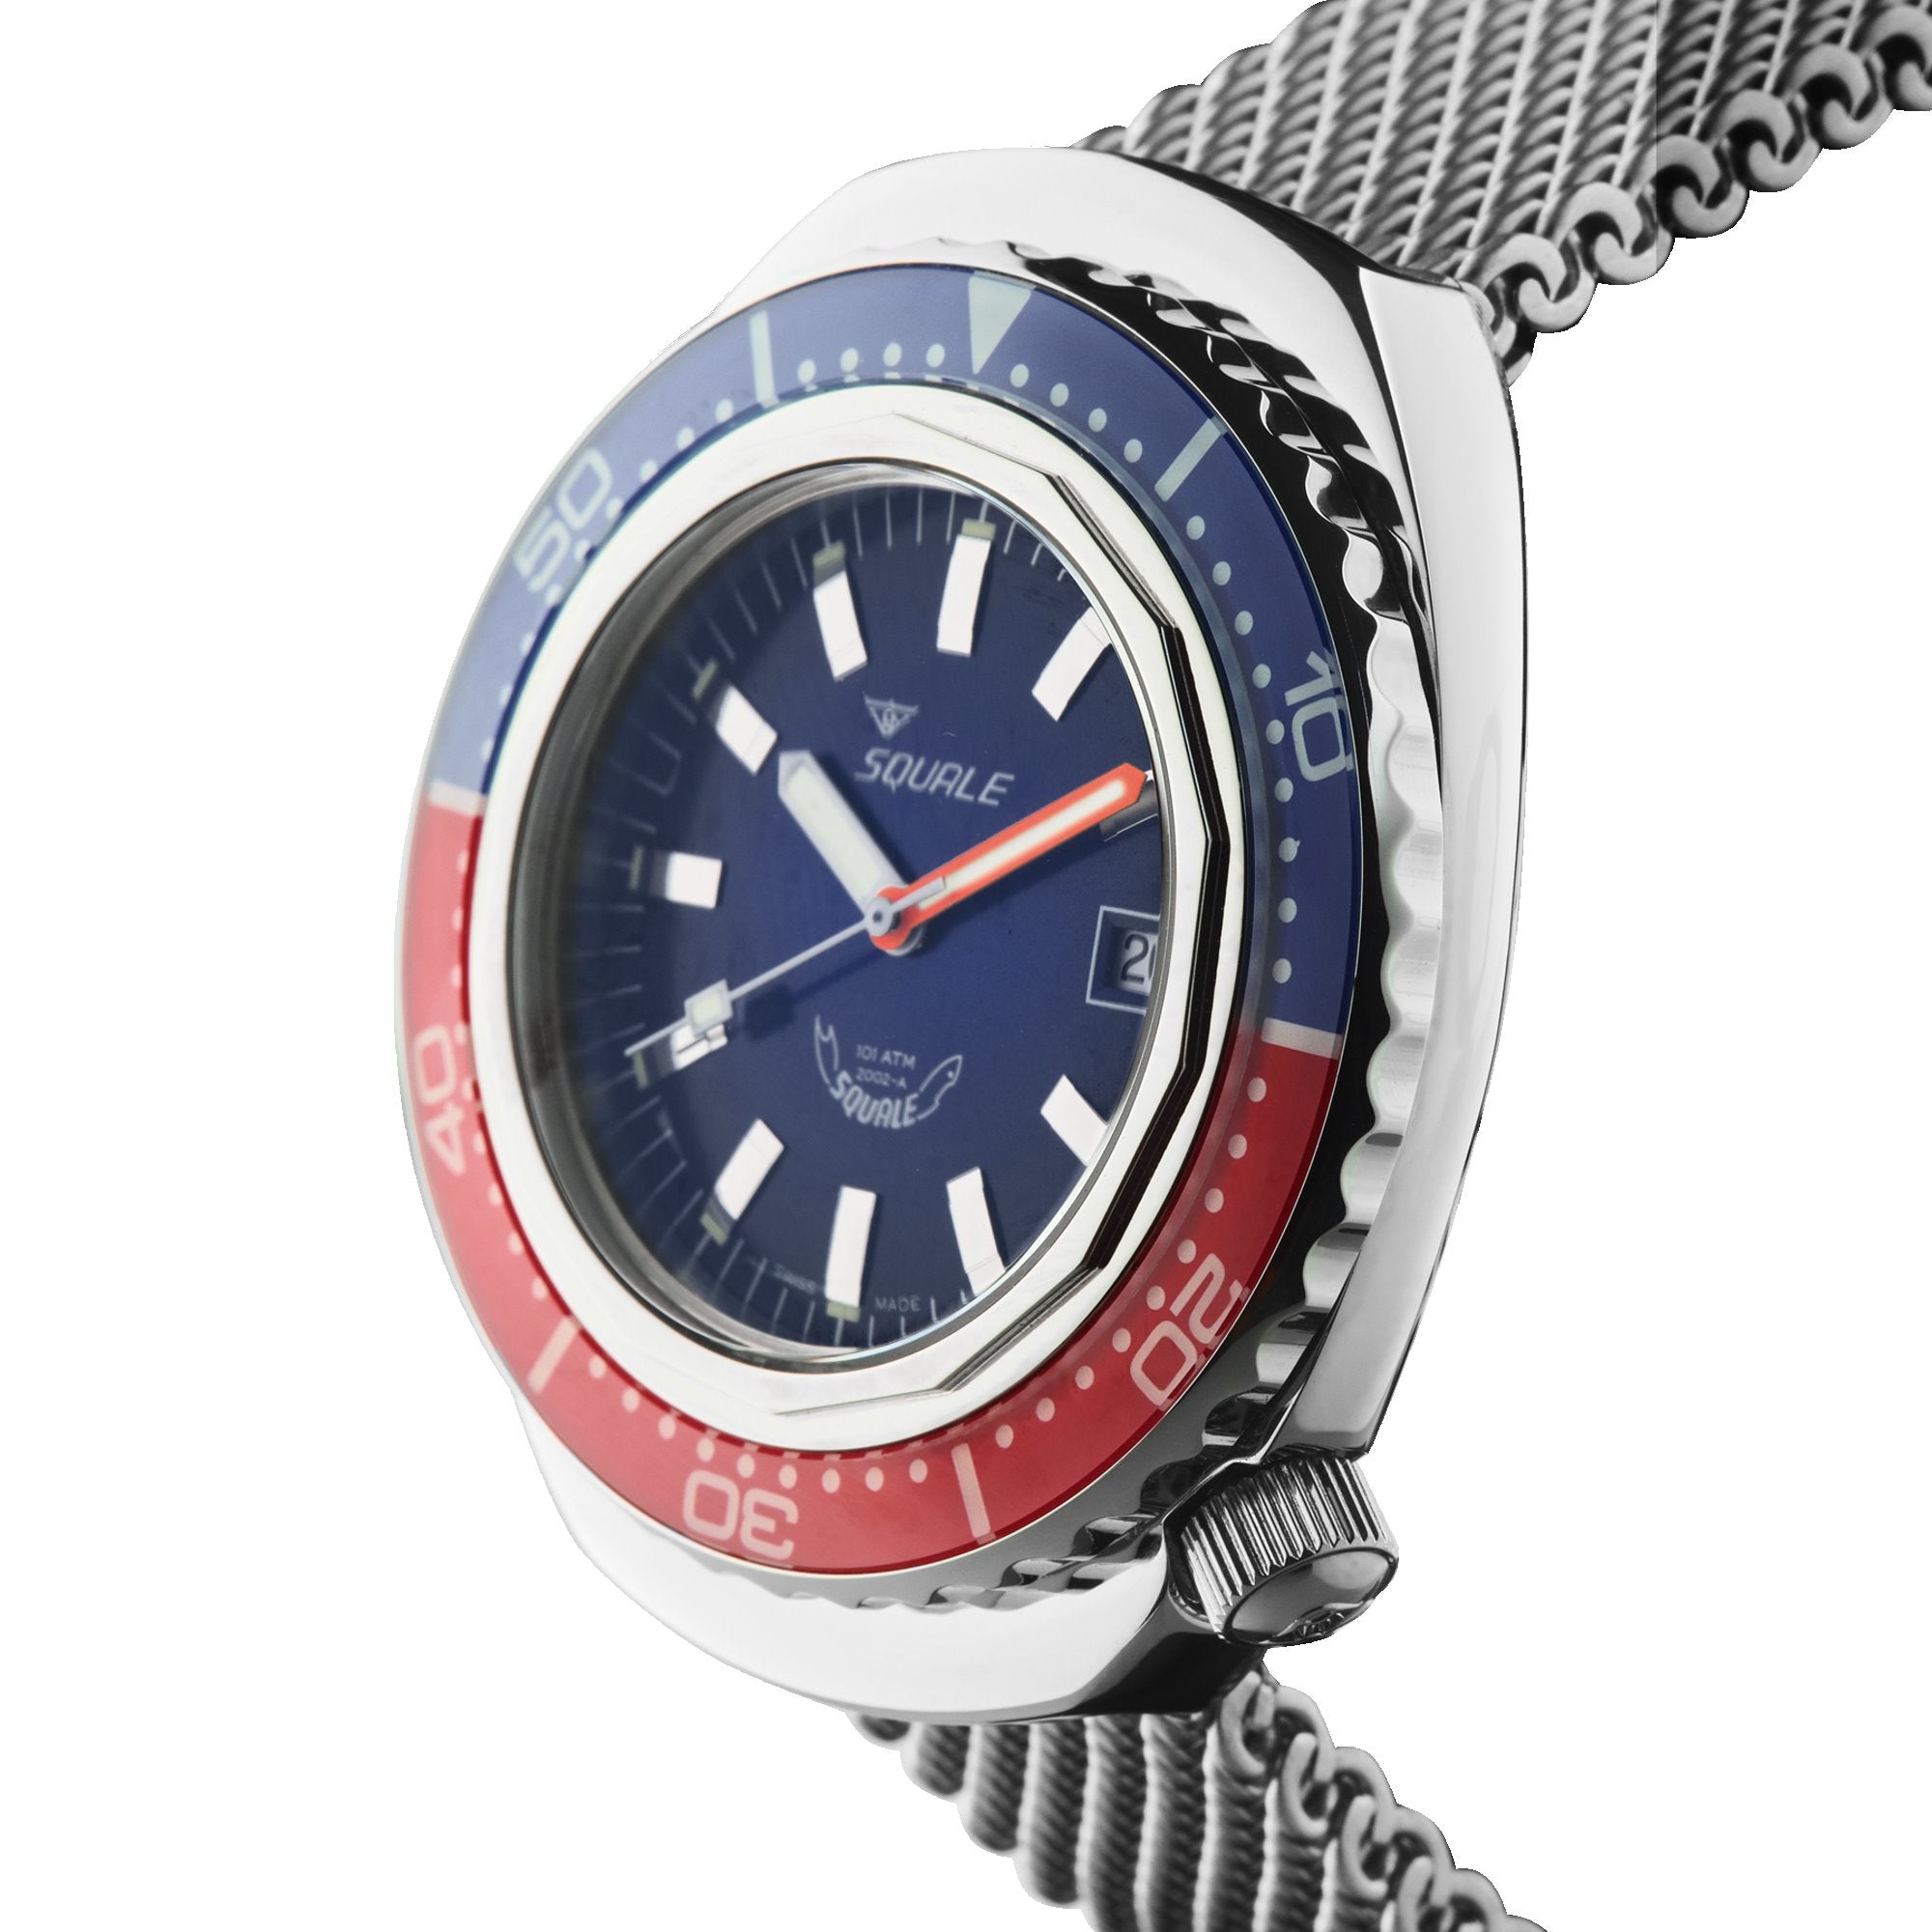 SQUALE 2002 - BLUE RED